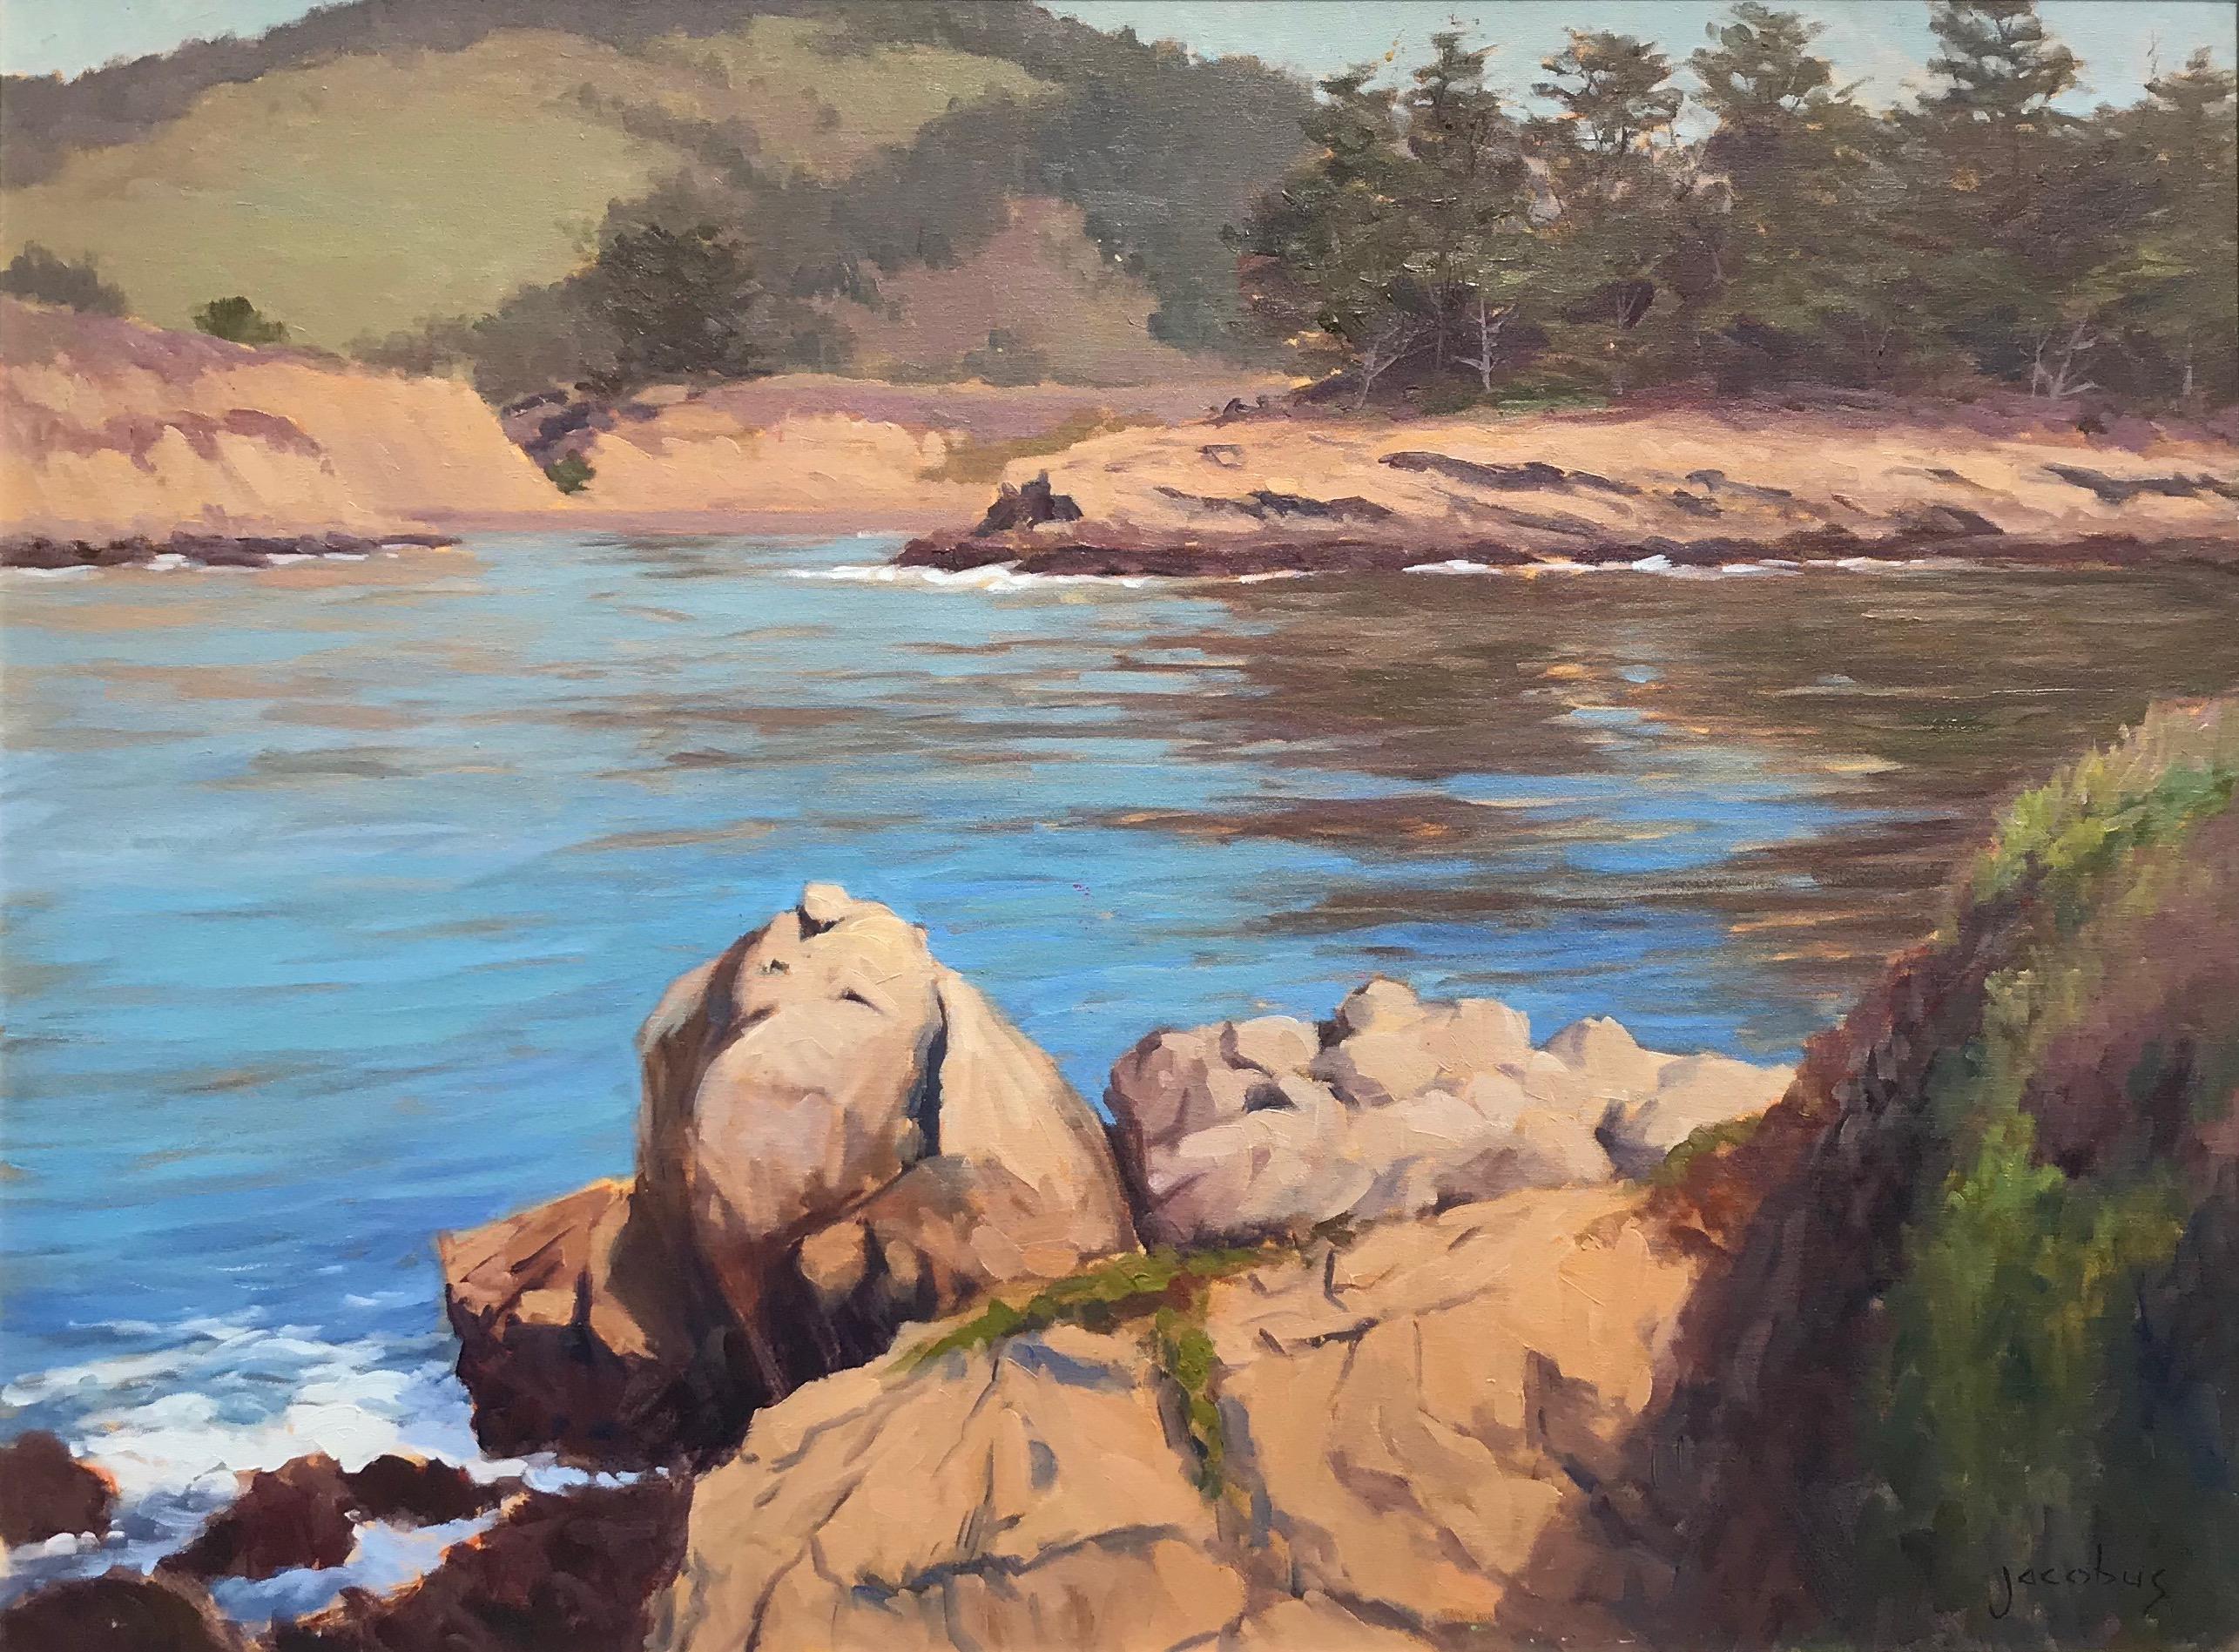 Jacobus Baas Landscape Painting - "Calm Water at Whaler's Cove" Central California Coastal Scene